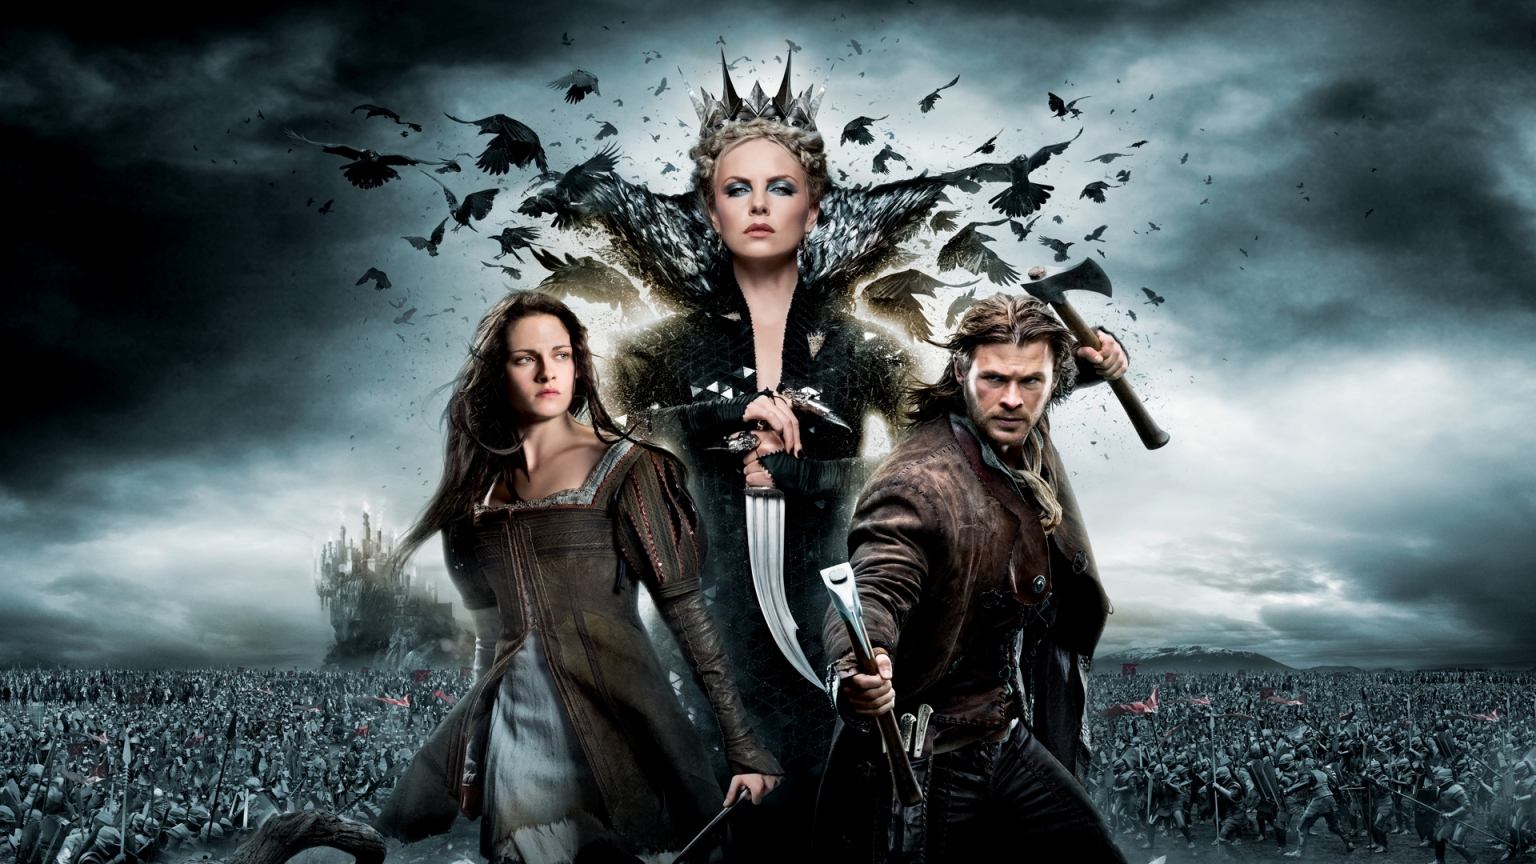 Lovely Snow White and The Huntsman for 1536 x 864 HDTV resolution